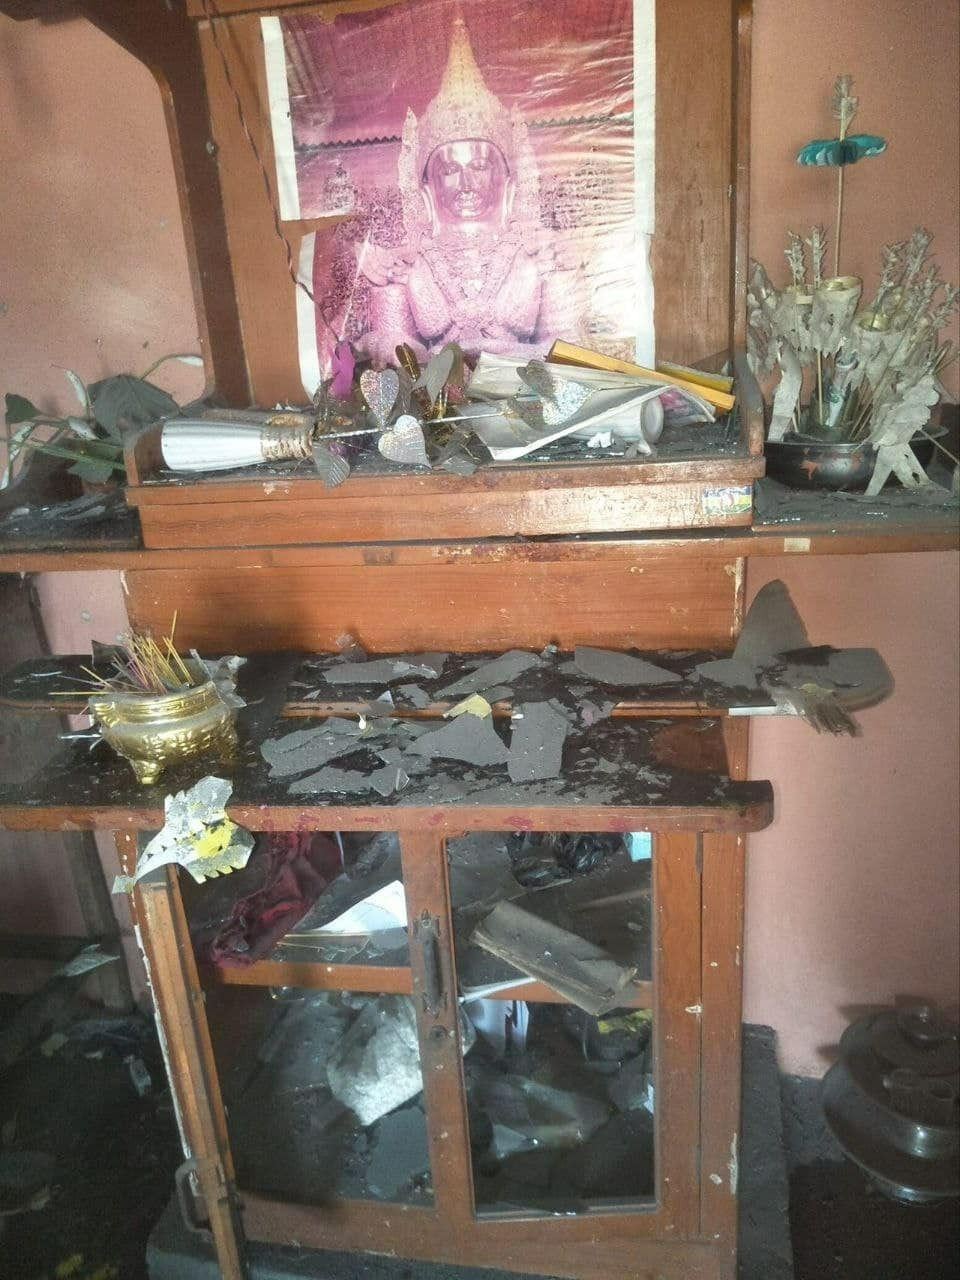 House damaged by jet fighter bombs